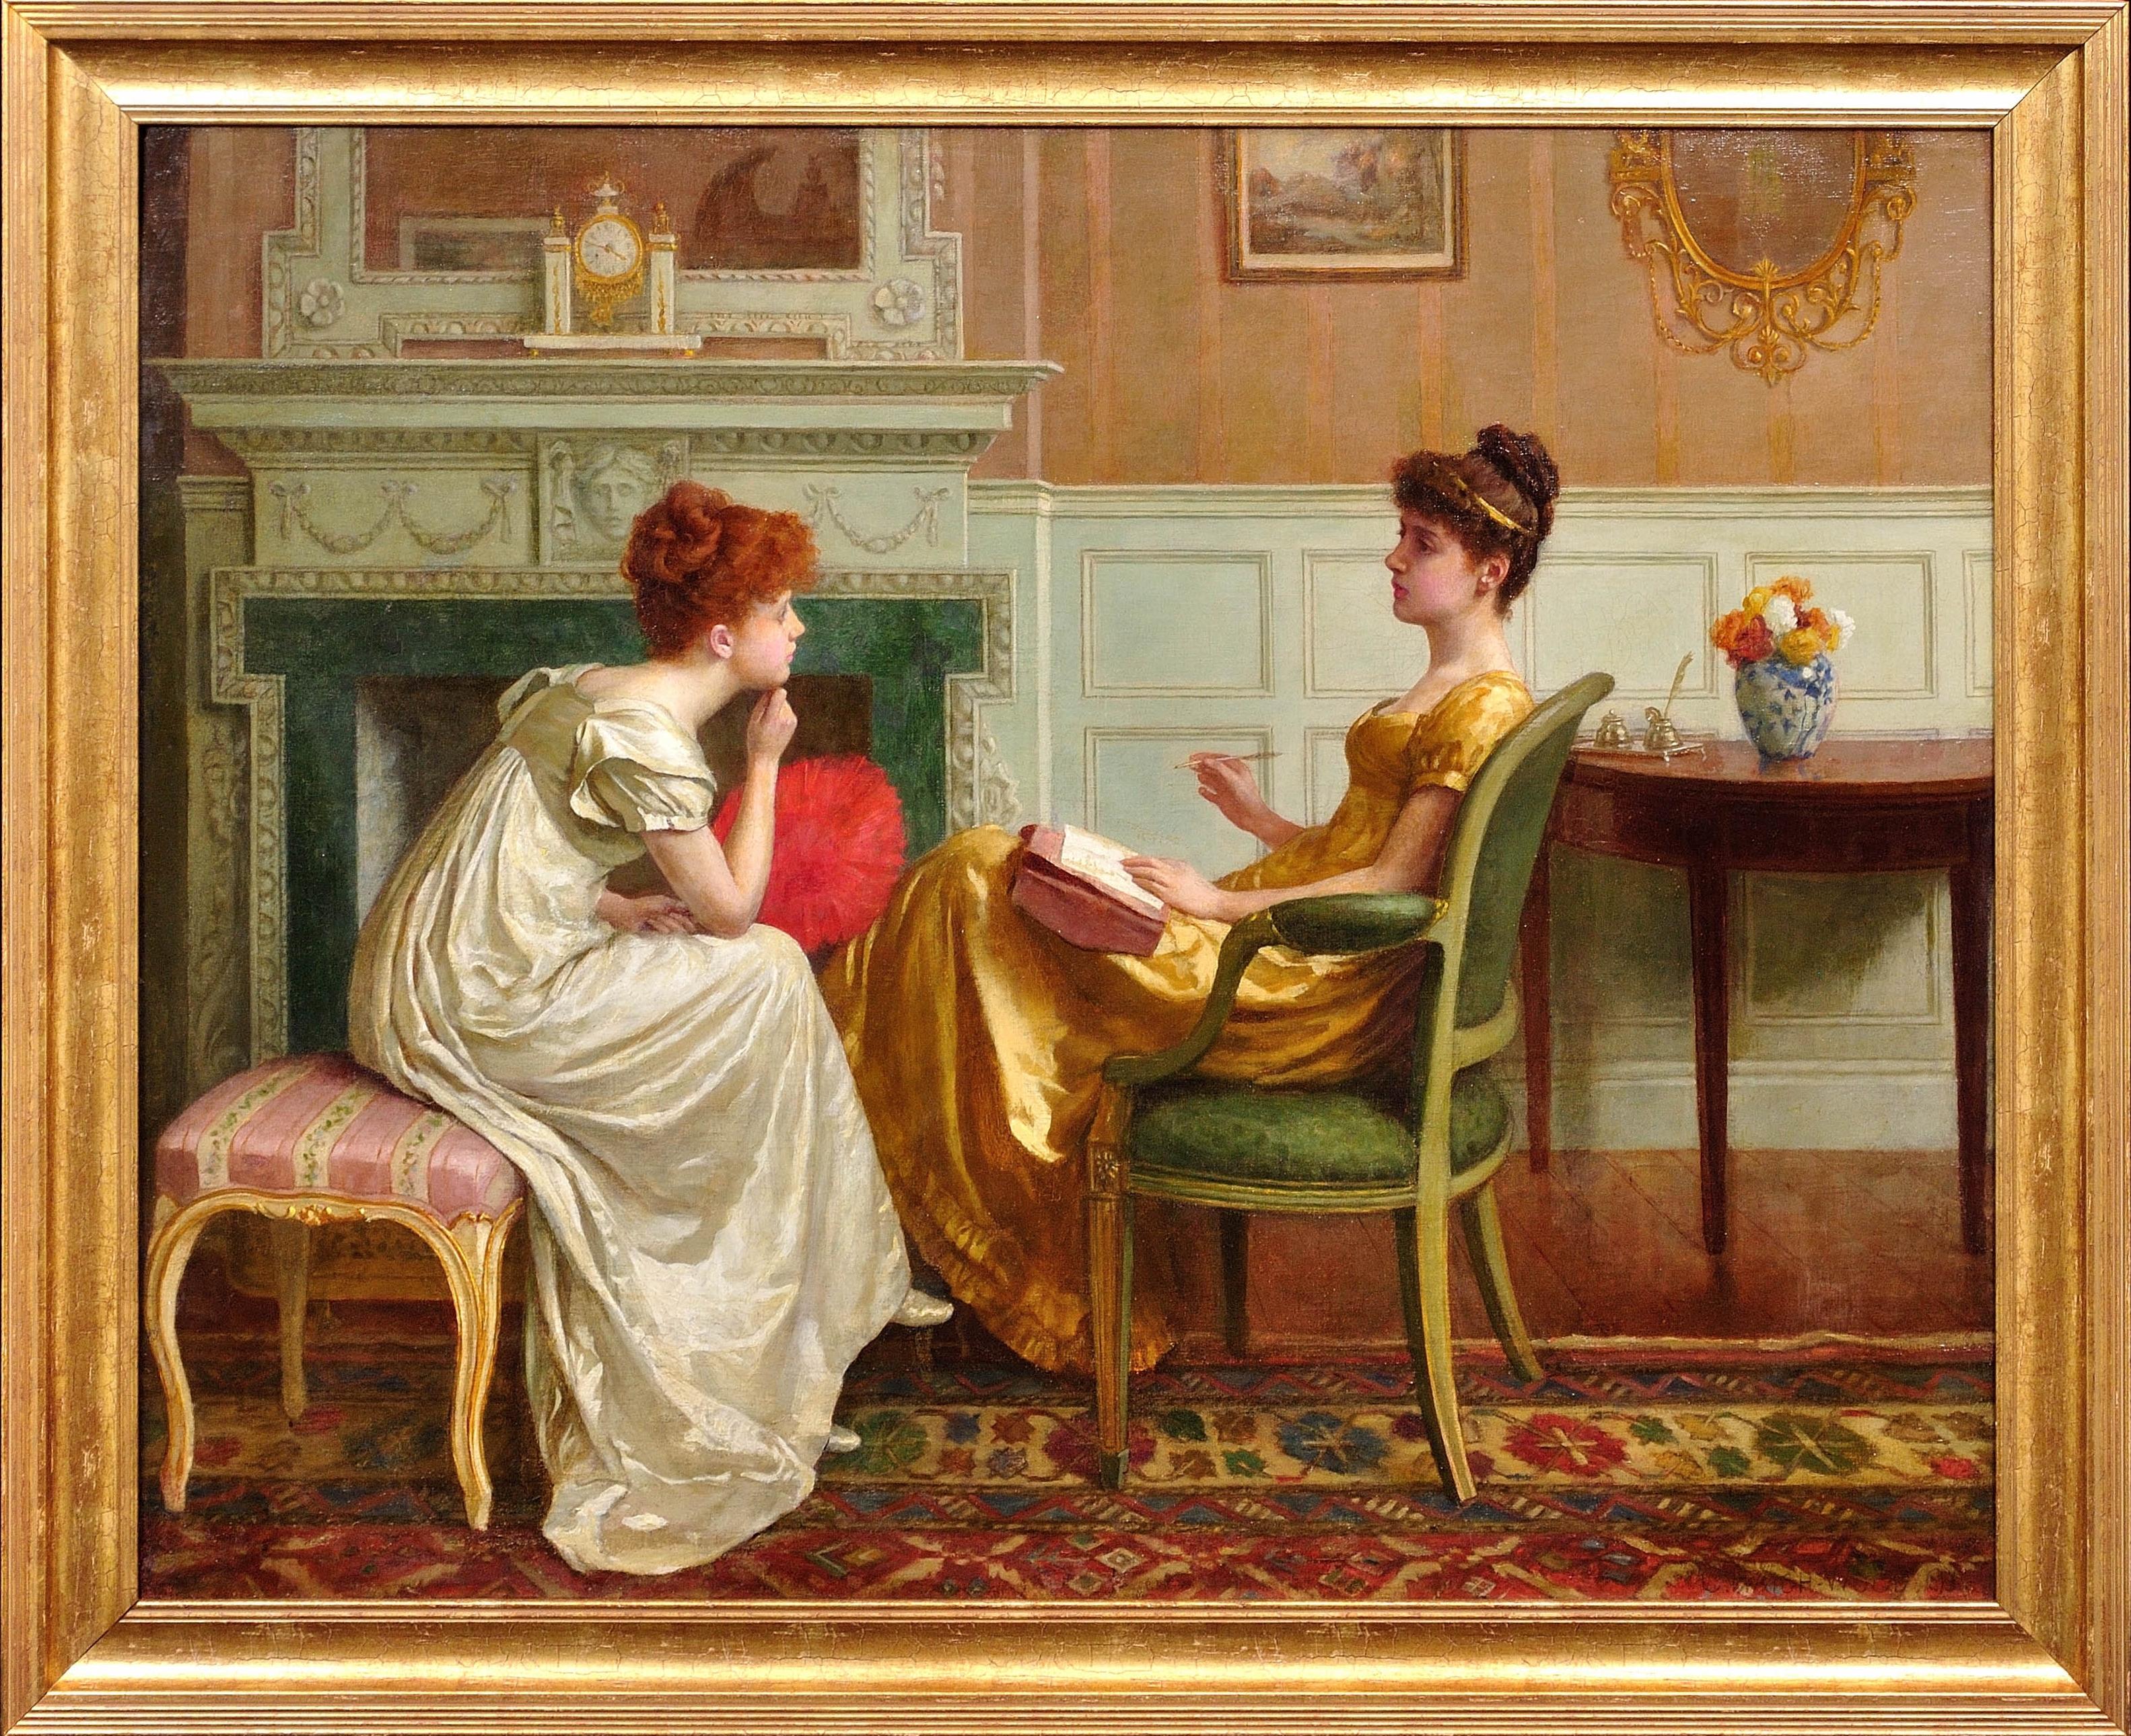 Charles Haigh-Wood Figurative Painting - How long will it take him to propose to me? 1891. Victorian England Parlor Scene